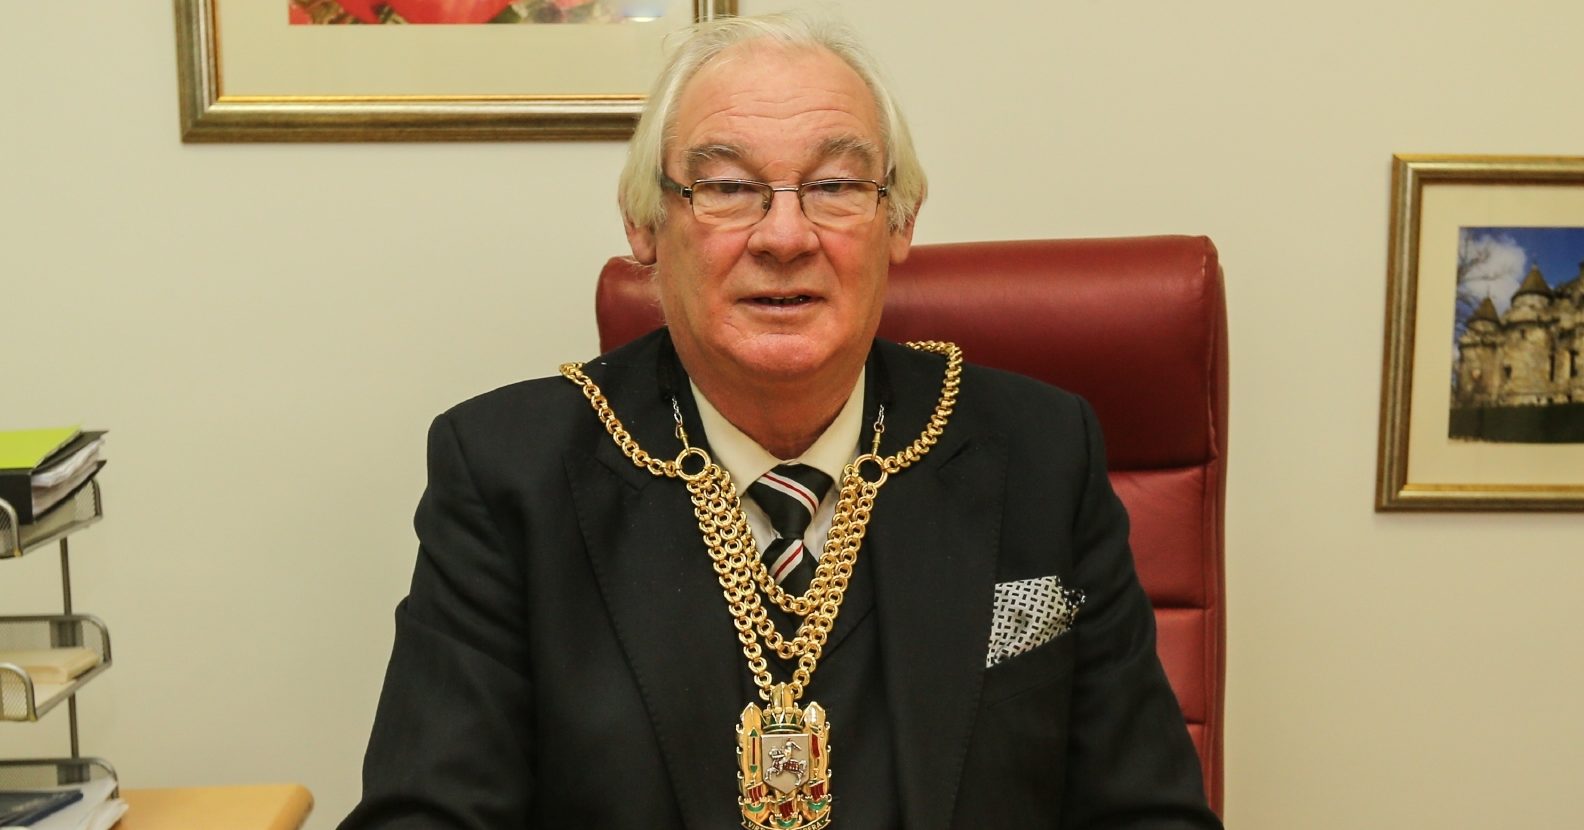 Provost Jim Leishman has encouraged Fifers to reflect on VE Day.